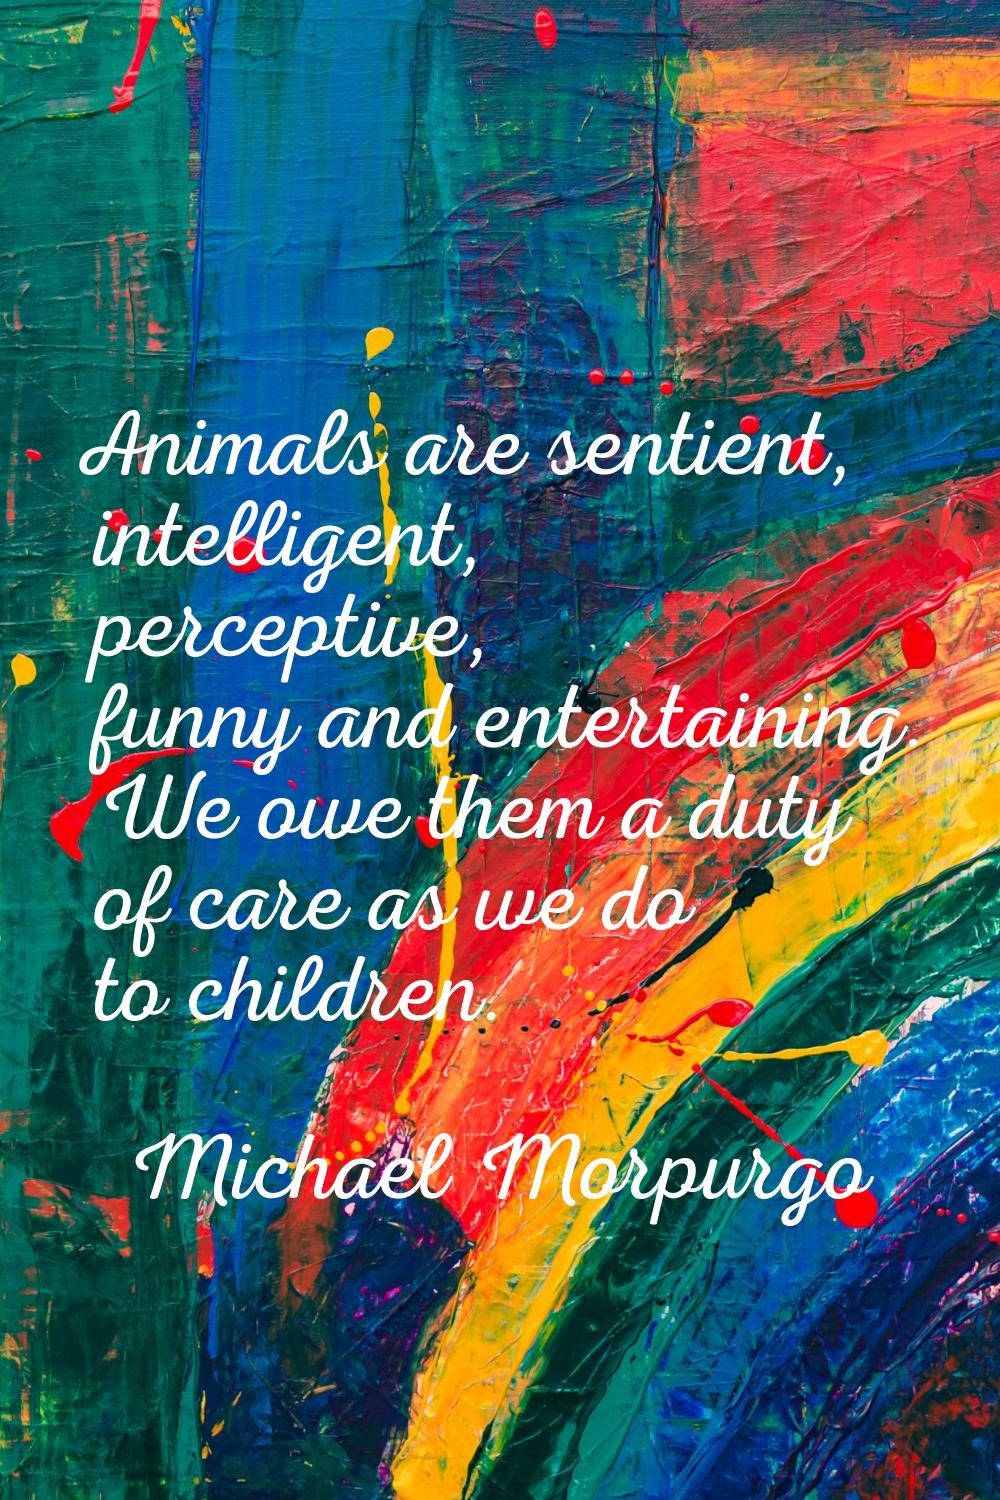 Animals are sentient, intelligent, perceptive, funny and entertaining. We owe them a duty of care a